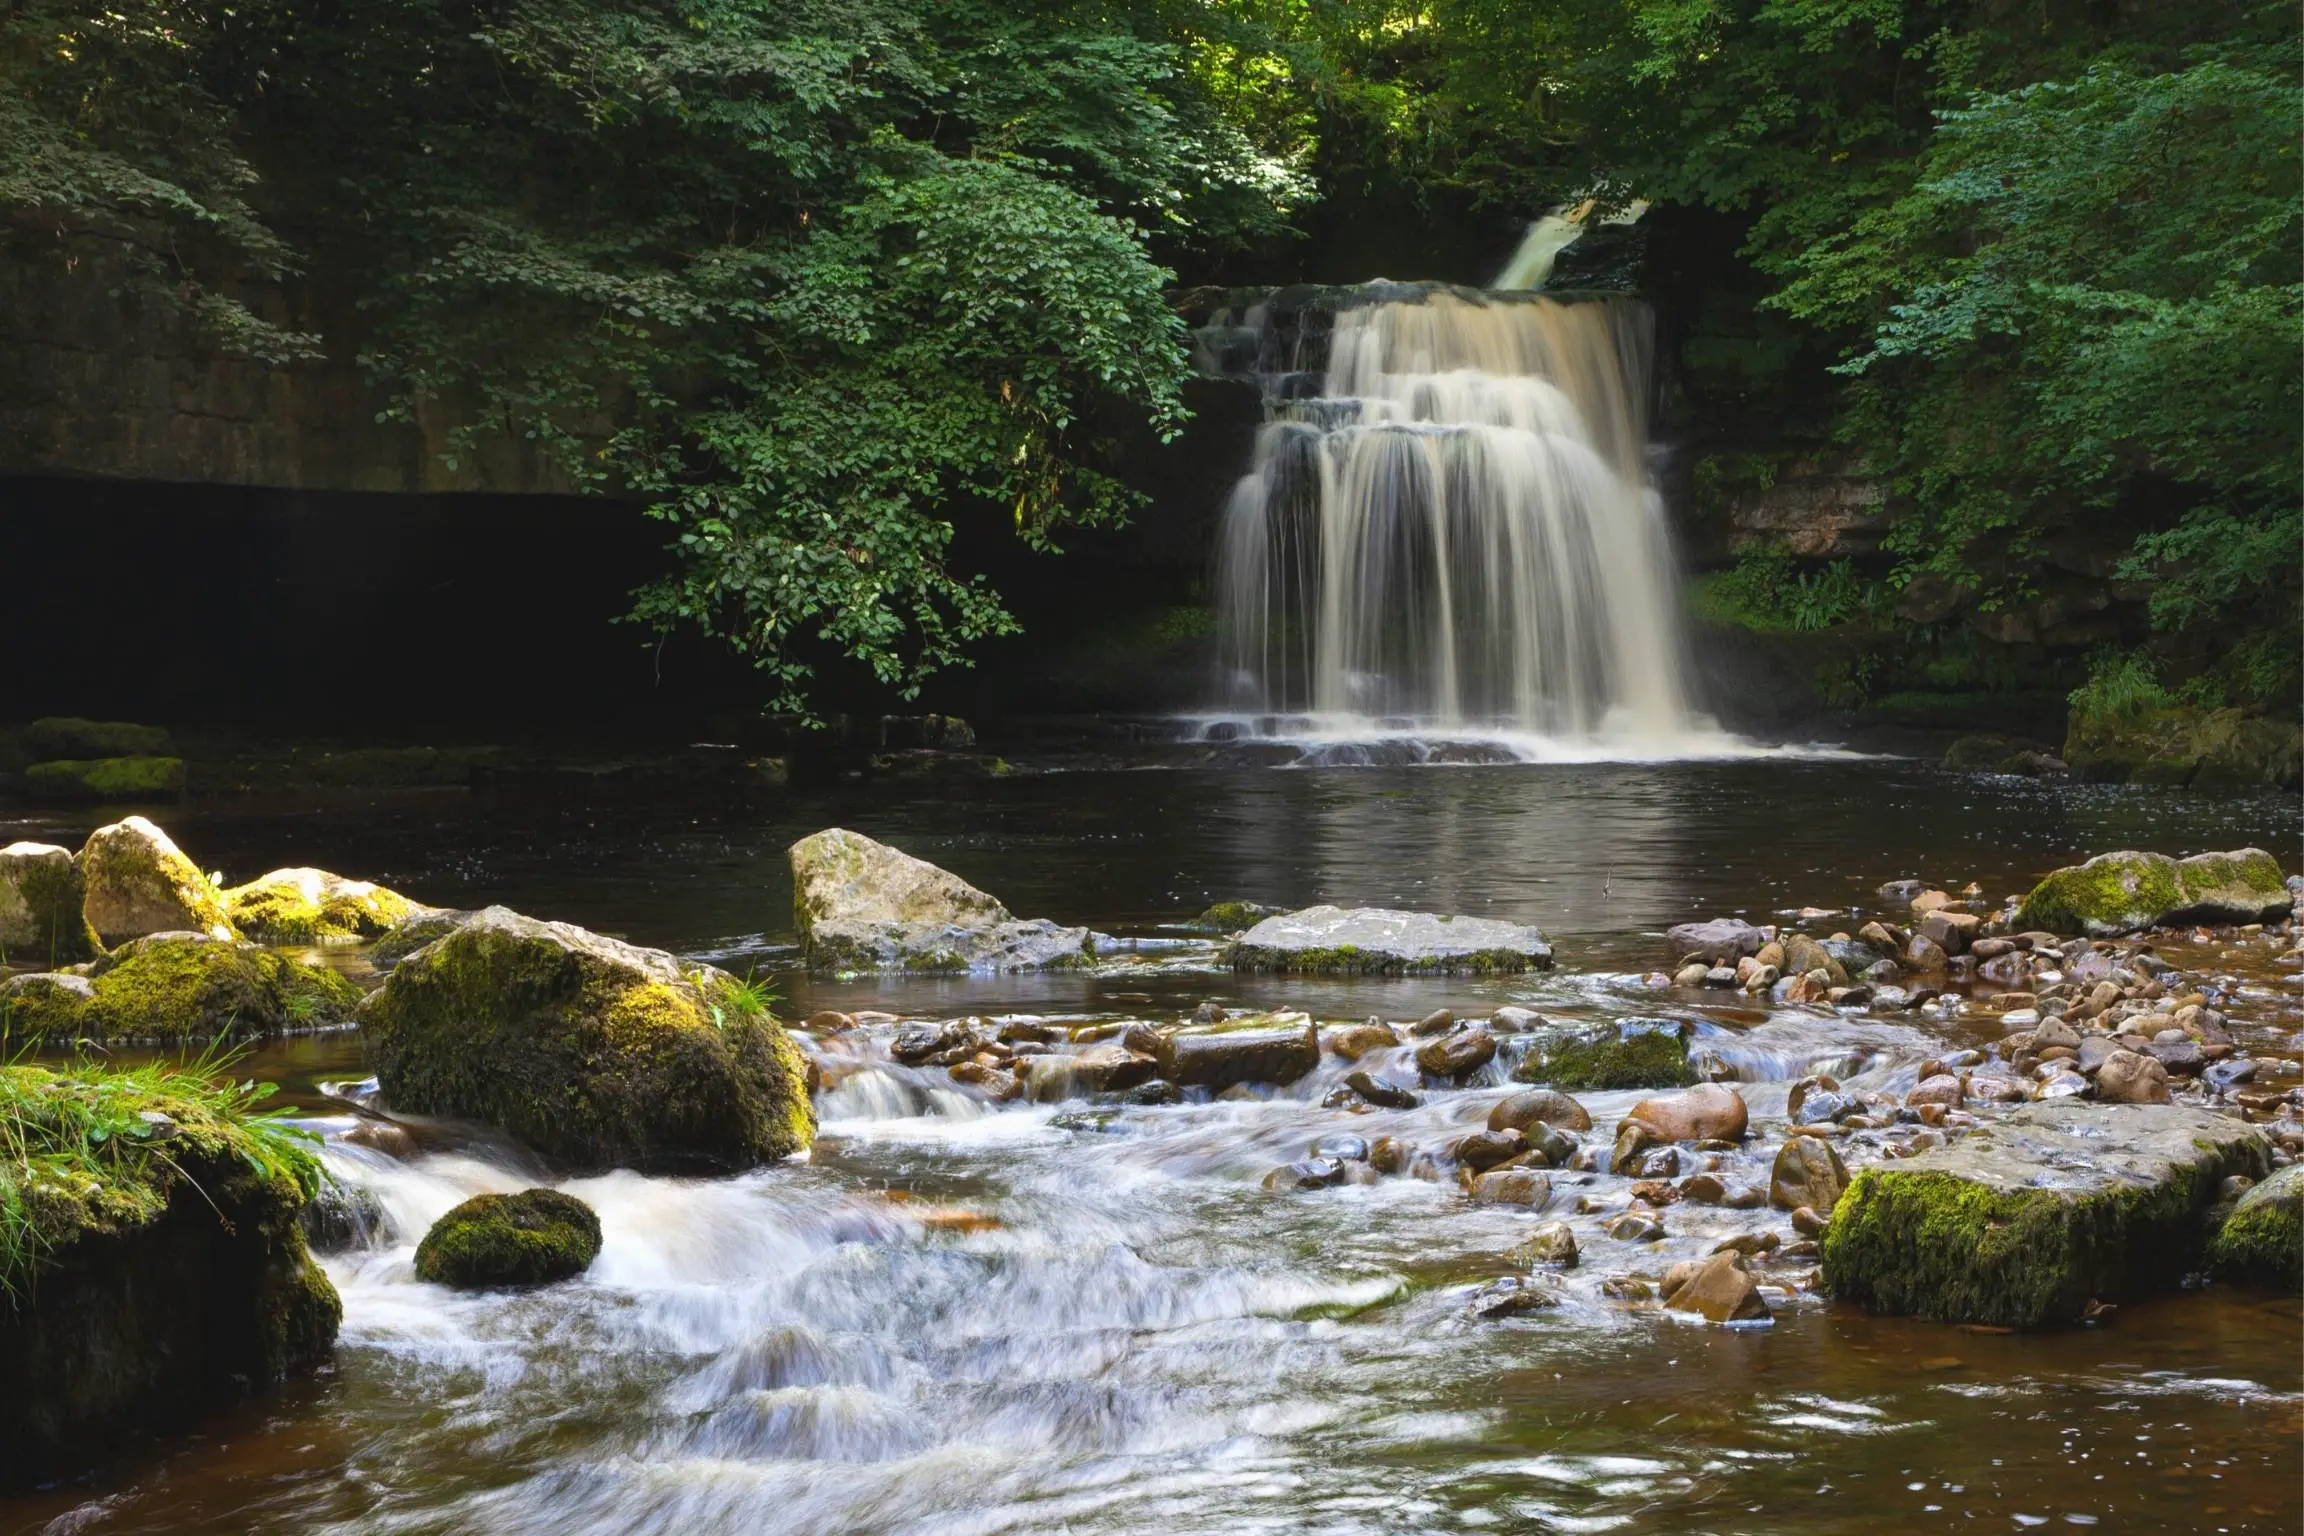 Wonderful Waterfalls To Visit in the Yorkshire Dales